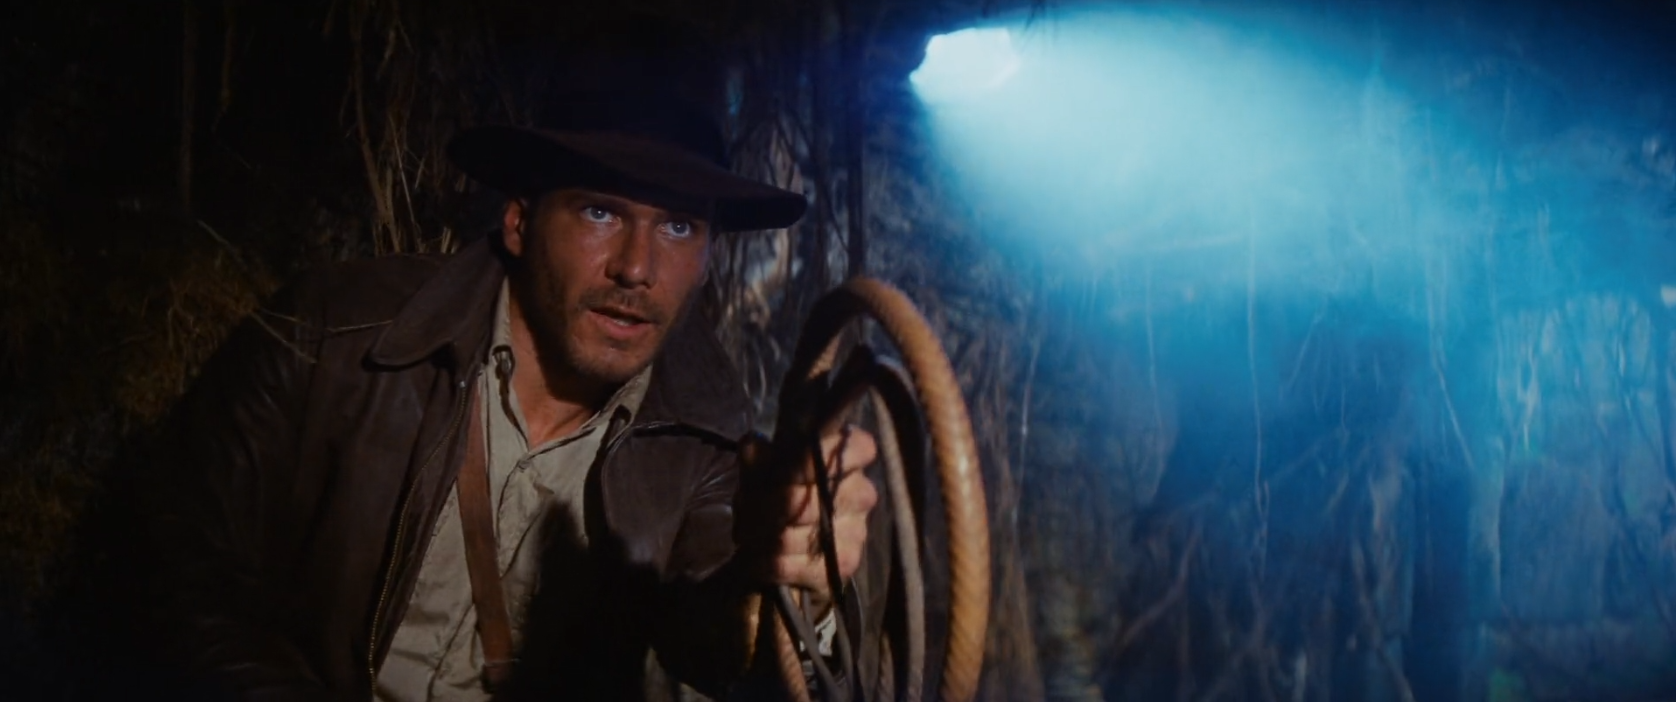 Indiana Jones and the Raiders of the Lost Ark - Indy spots the trap